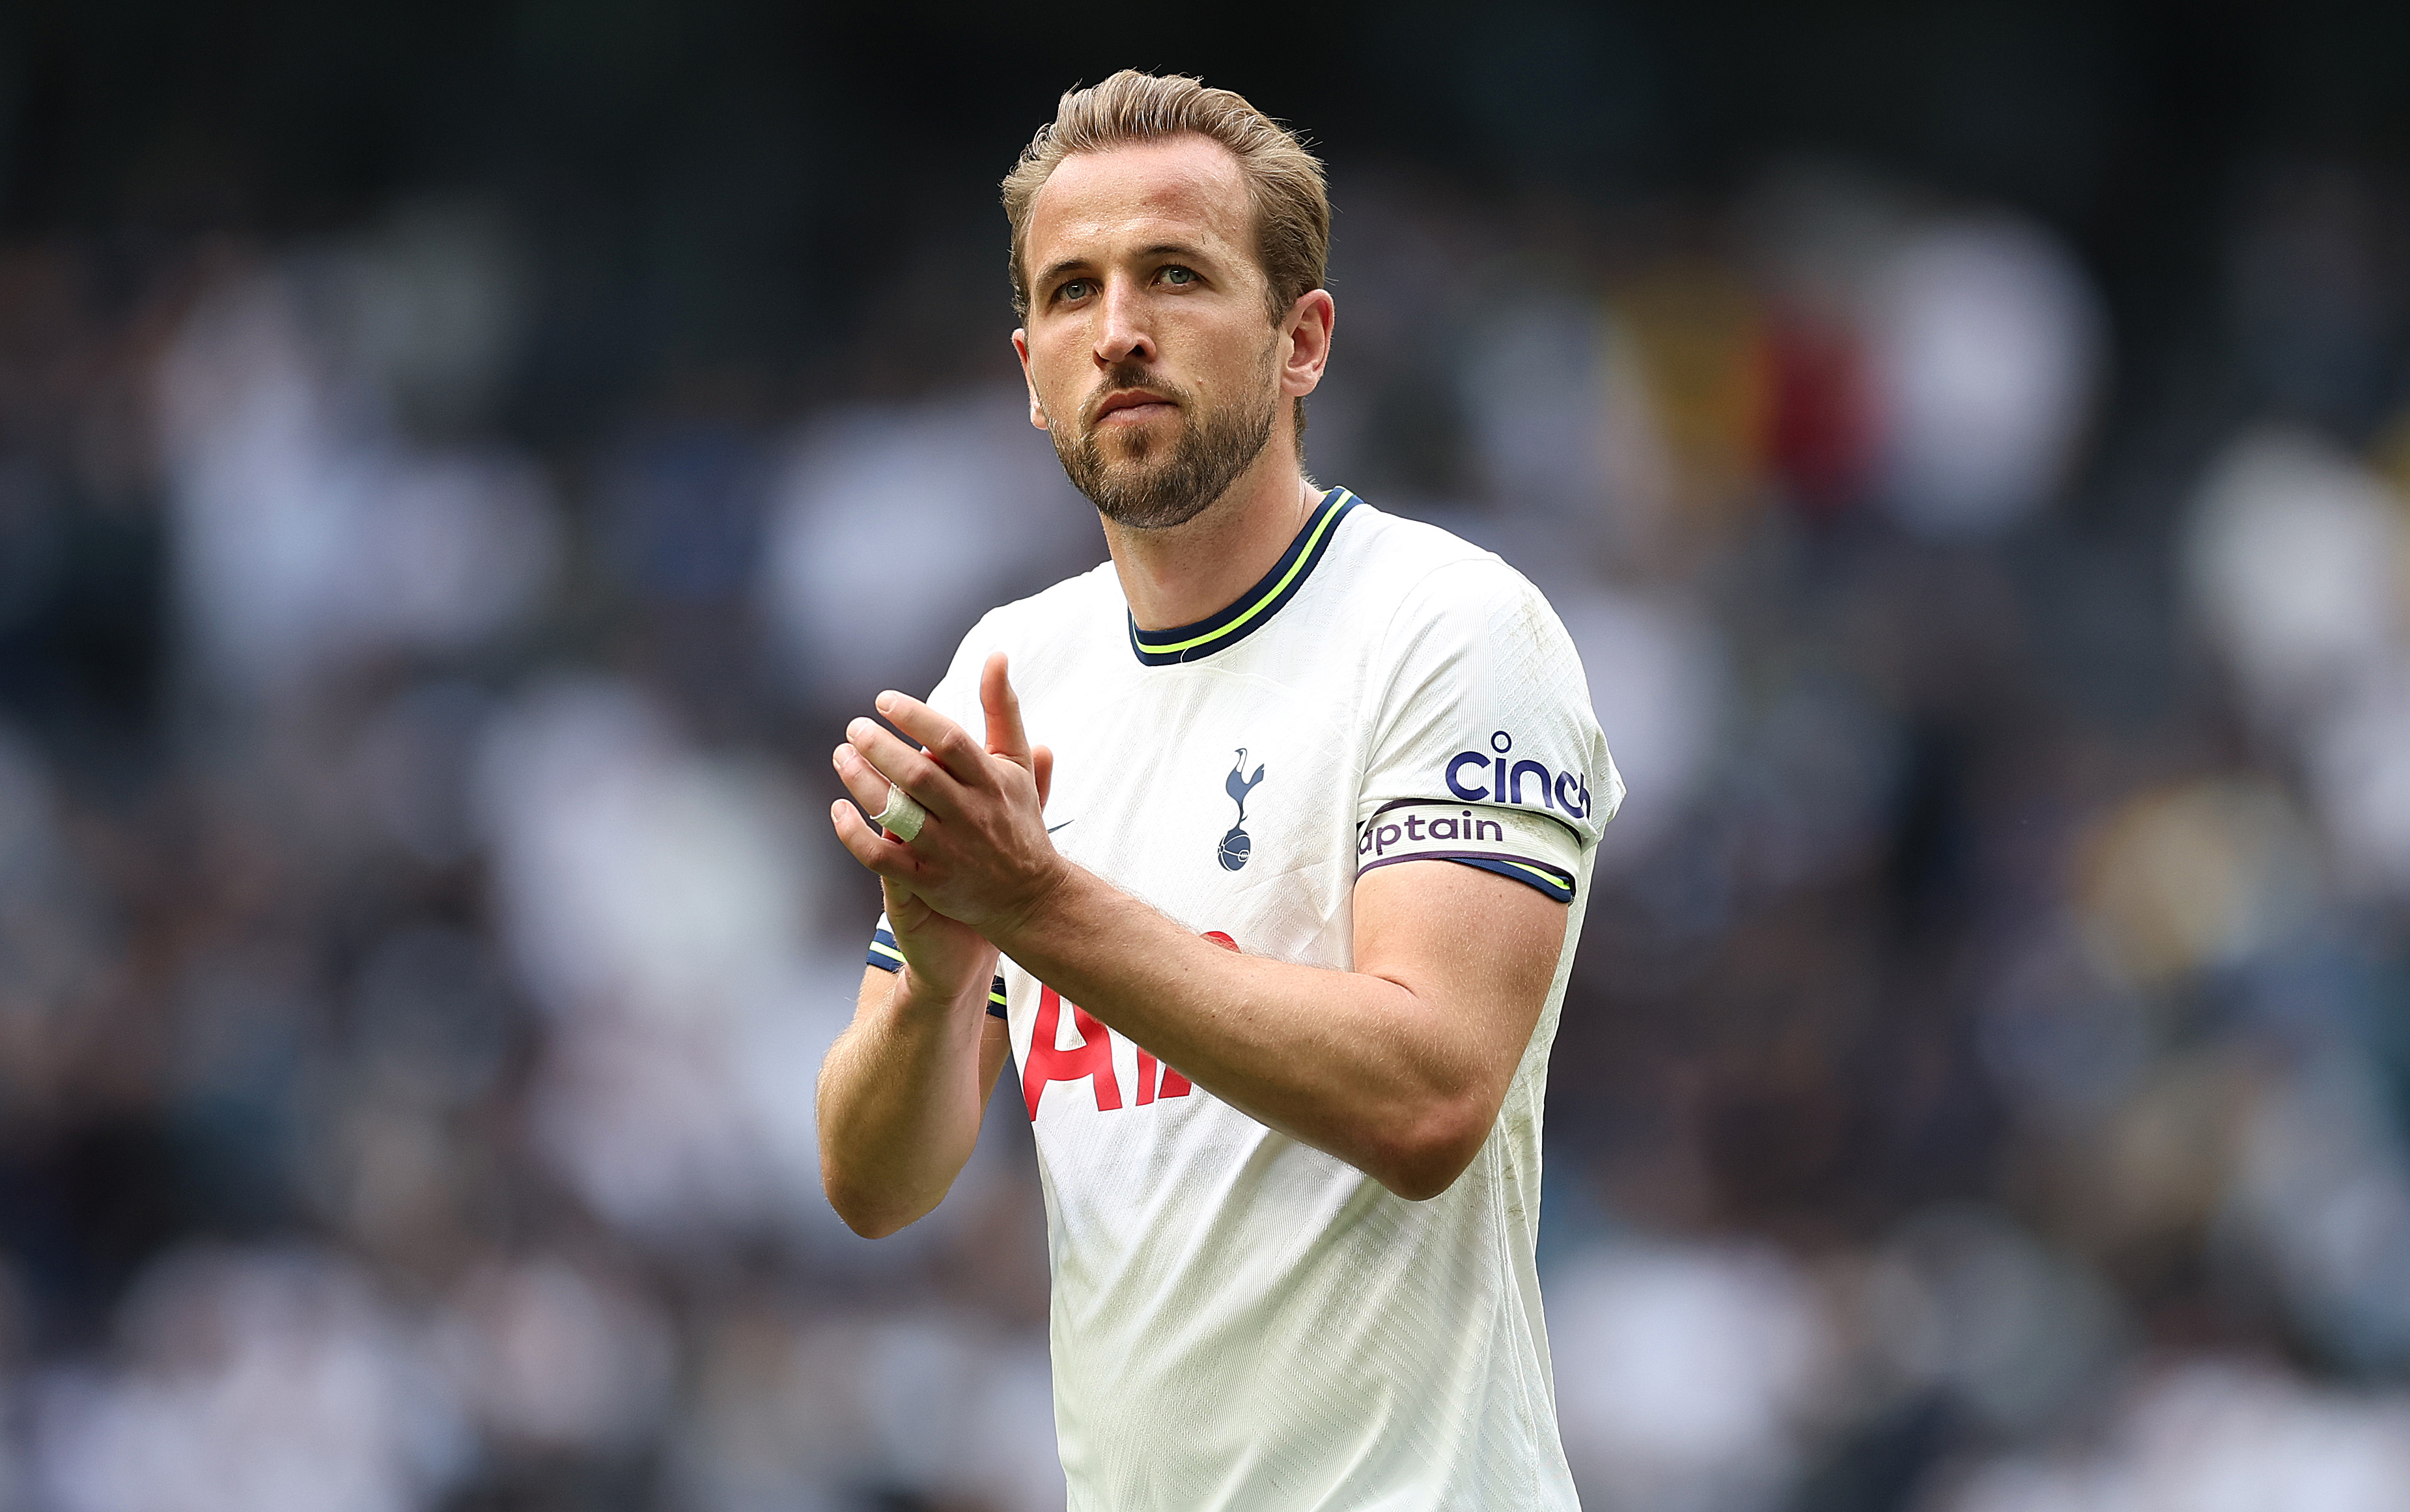 Exclusive: Bundesliga insider drops update on Bayern ‘contact’ for Harry Kane as Man Utd target also liked CaughtOffside